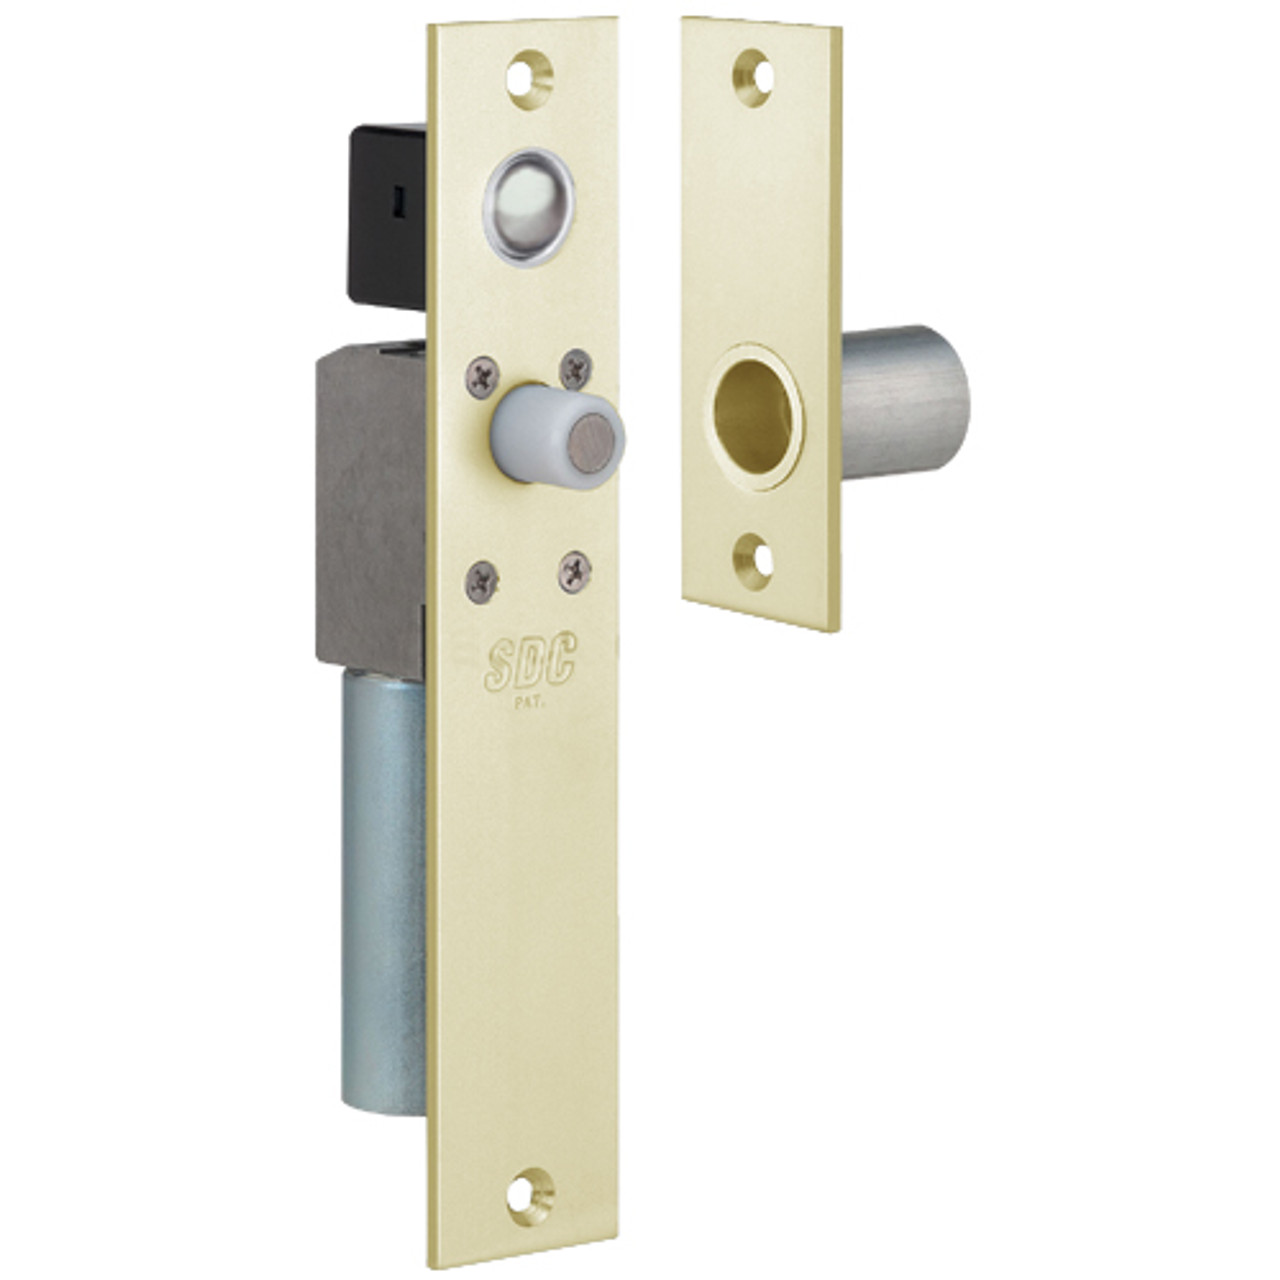 FS23MIDB SDC Dual FailSafe Spacesaver Mortise Bolt Lock with Bolt Position Sensor in Dull Brass